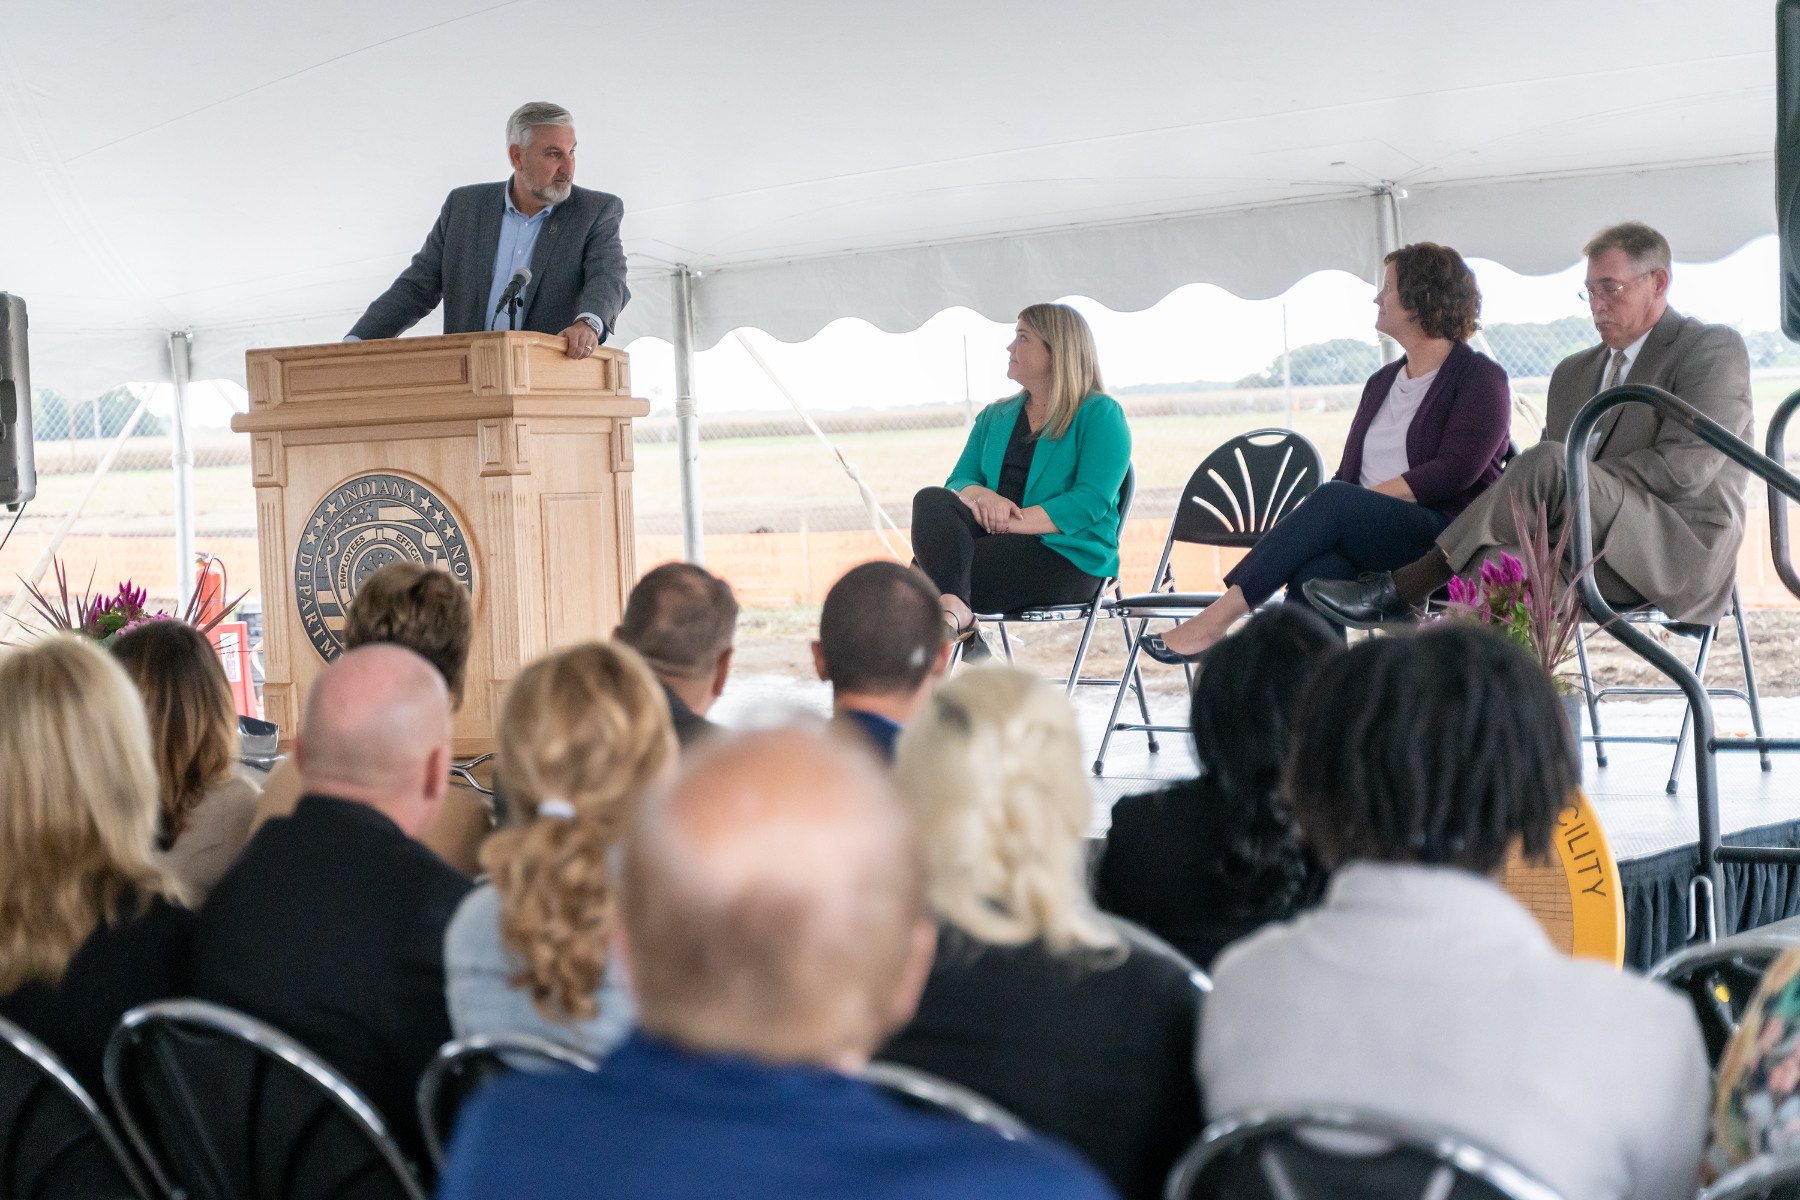 Indiana Governor Eric Holcomb speaks on Thursday, Sep. 28, 2023 during a groundbreaking for the new $1.2 Billion correctional facility under construction in Westville, Indiana. SCOTT ROBERSON | Indiana Department of Correction